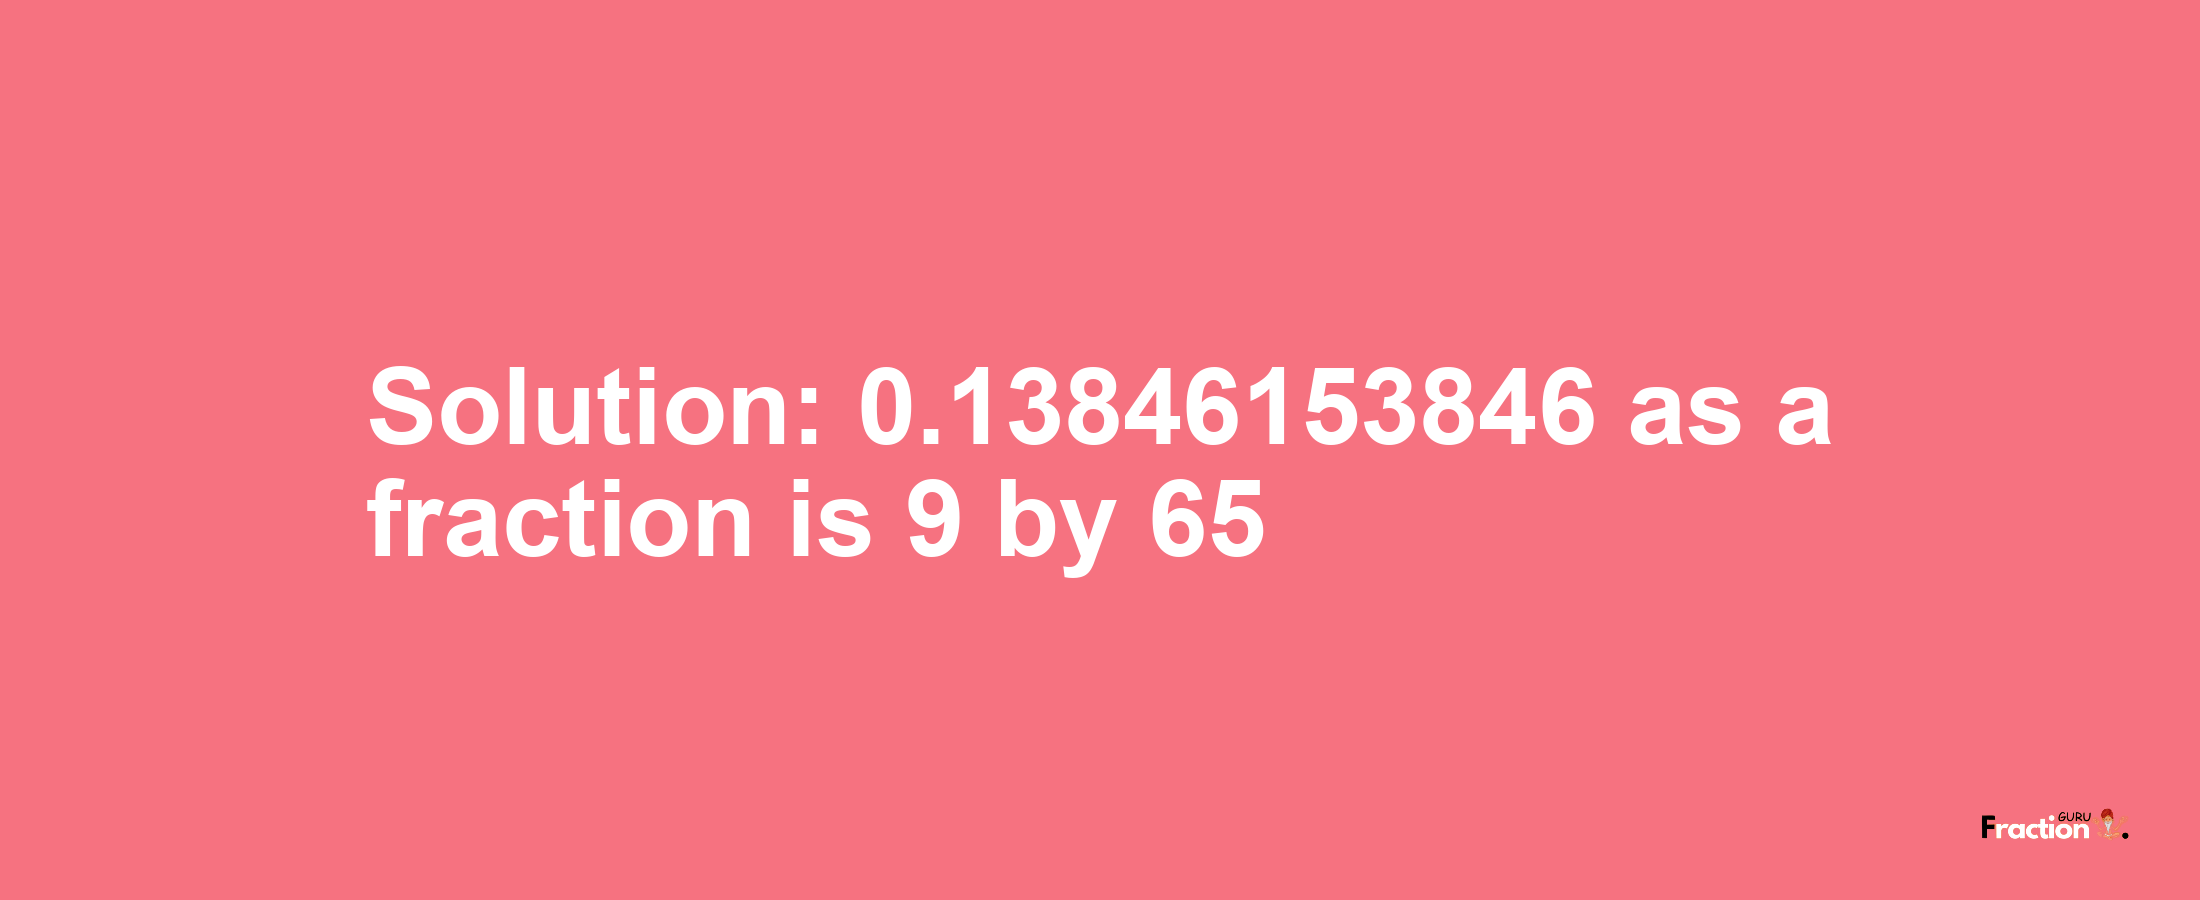 Solution:0.13846153846 as a fraction is 9/65